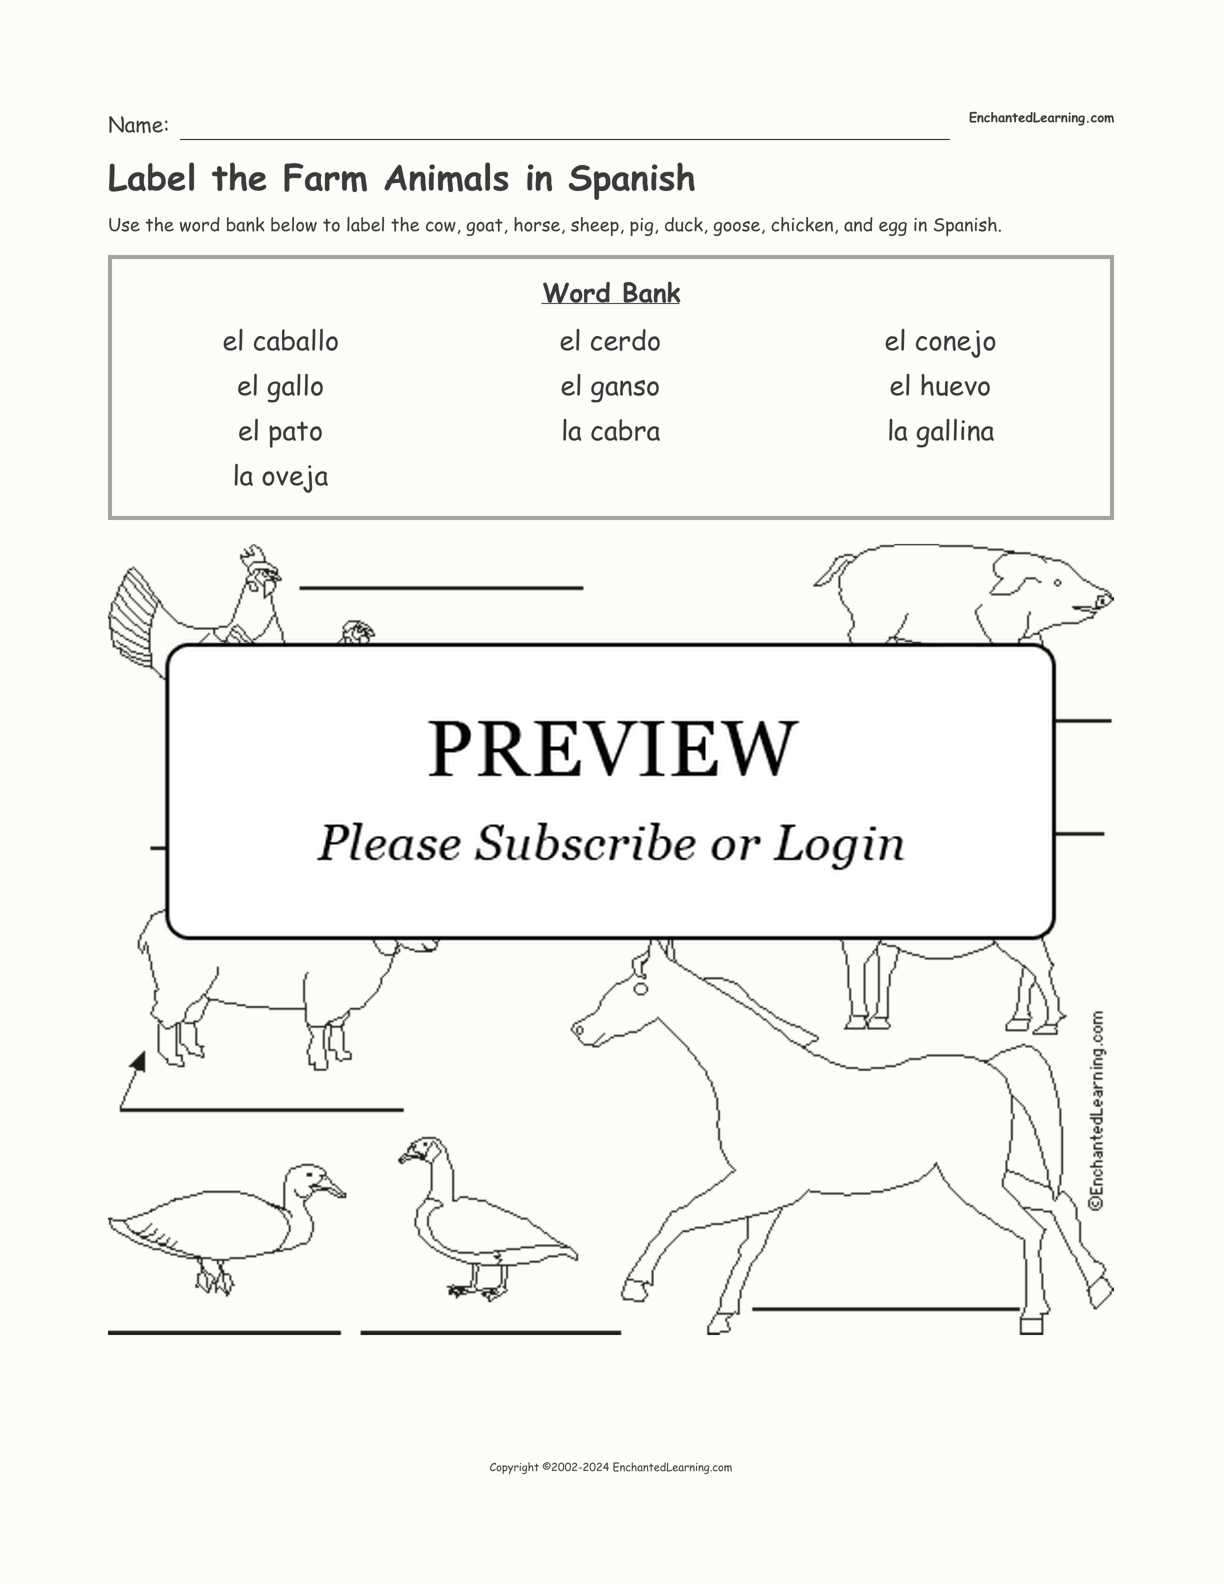 Label the Farm Animals in Spanish interactive worksheet page 1